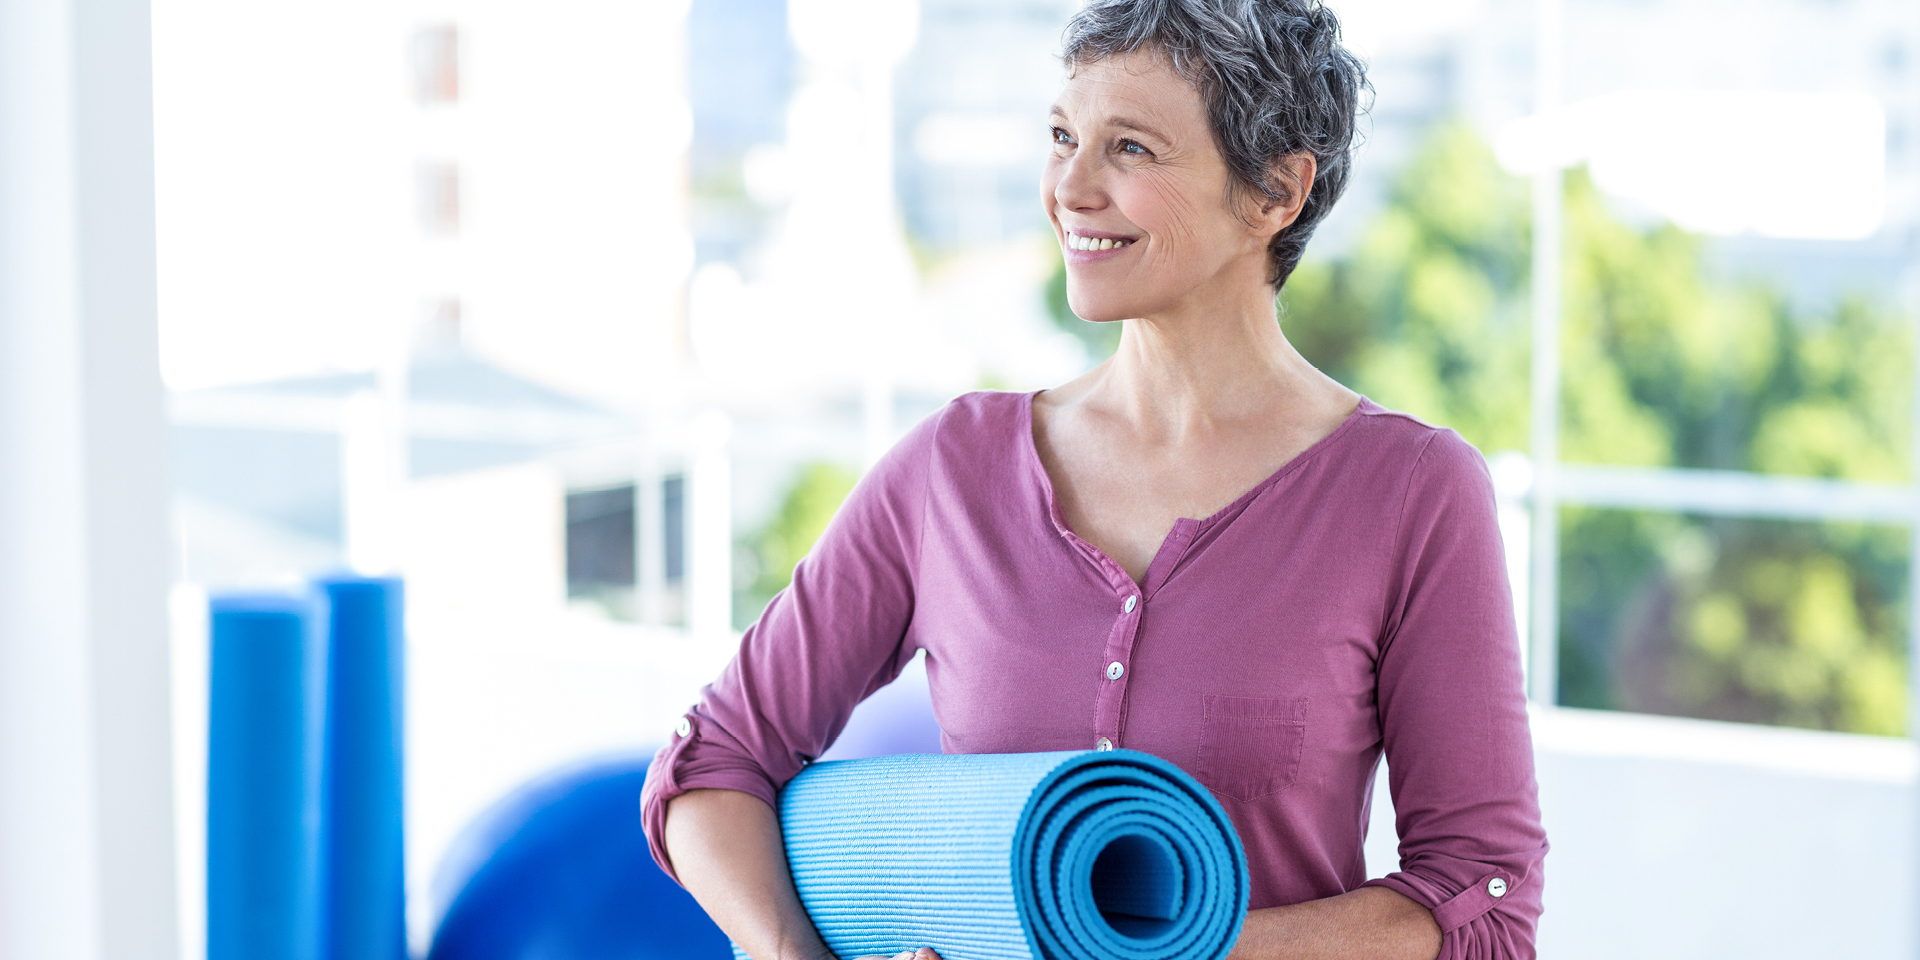 Short-haired woman holding yoga mat